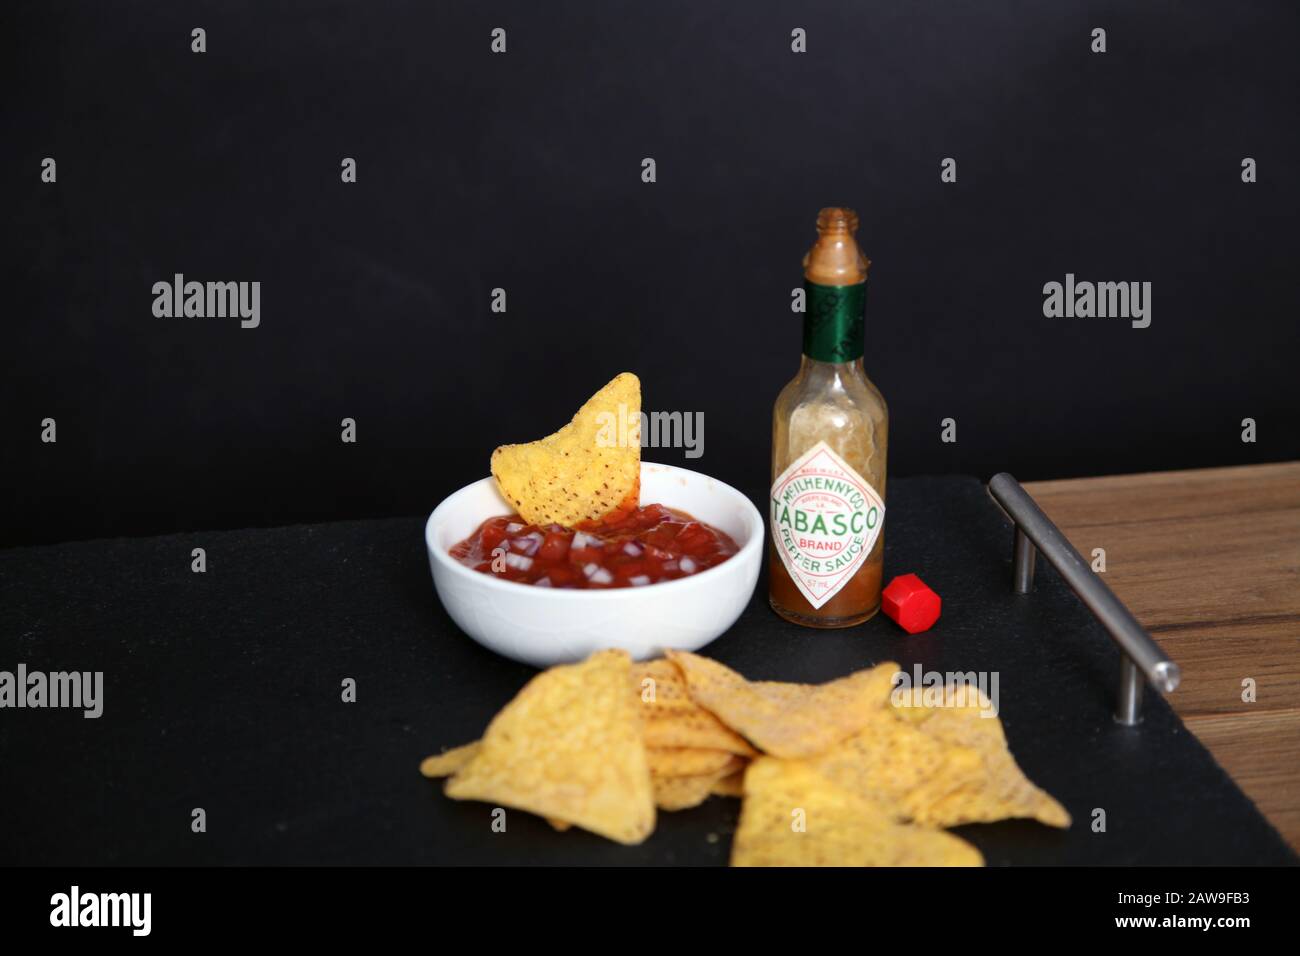 Hot Salsa dip with Doritos tortilla chips and Tabasco Sauce against ...